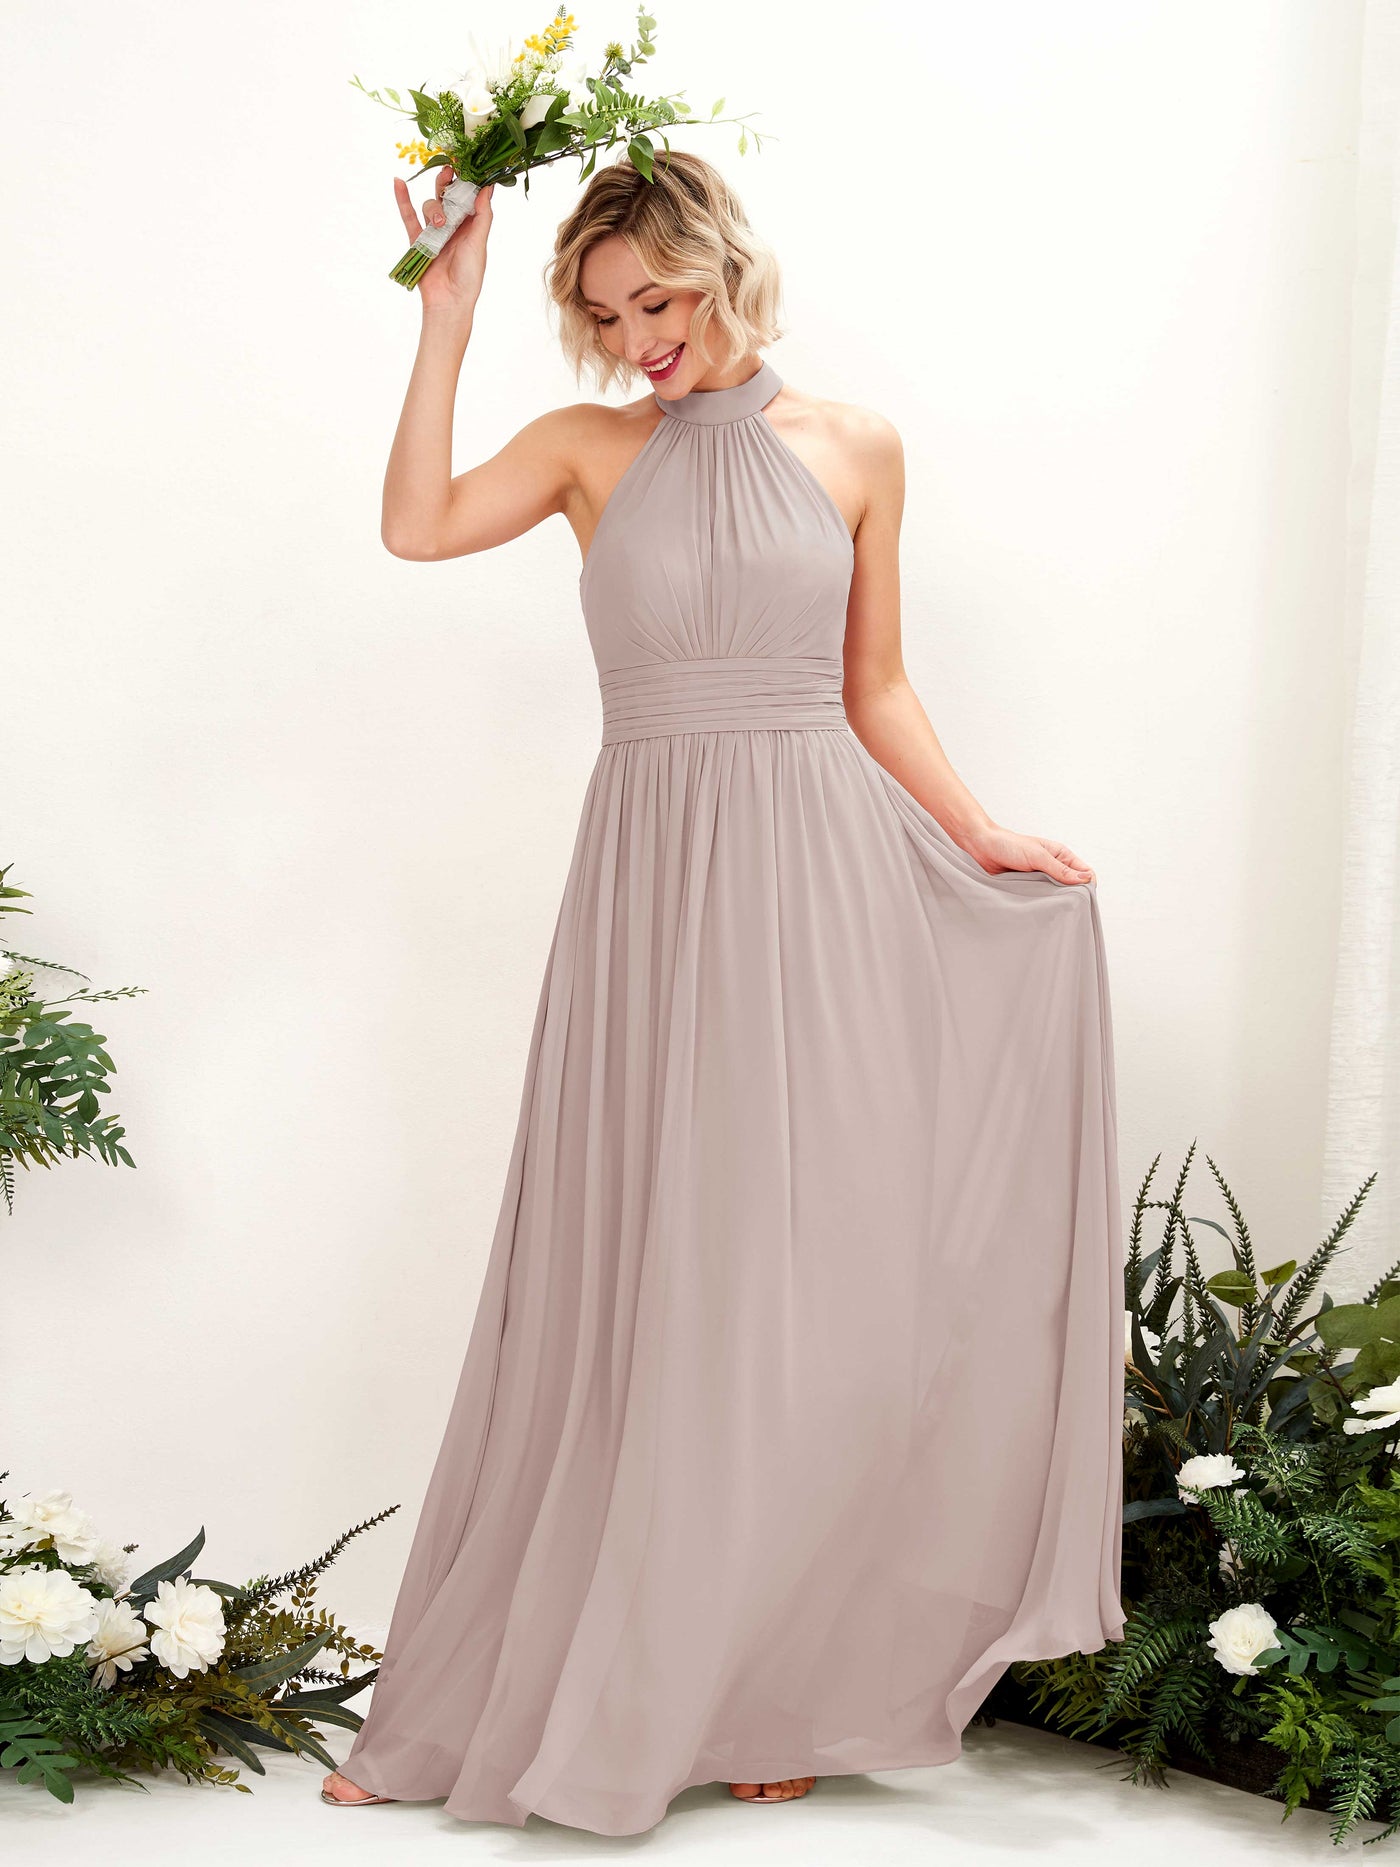 Taupe Bridesmaid Dresses Bridesmaid Dress A-line Chiffon Halter Full Length Sleeveless Wedding Party Dress (81225324)#color_taupe